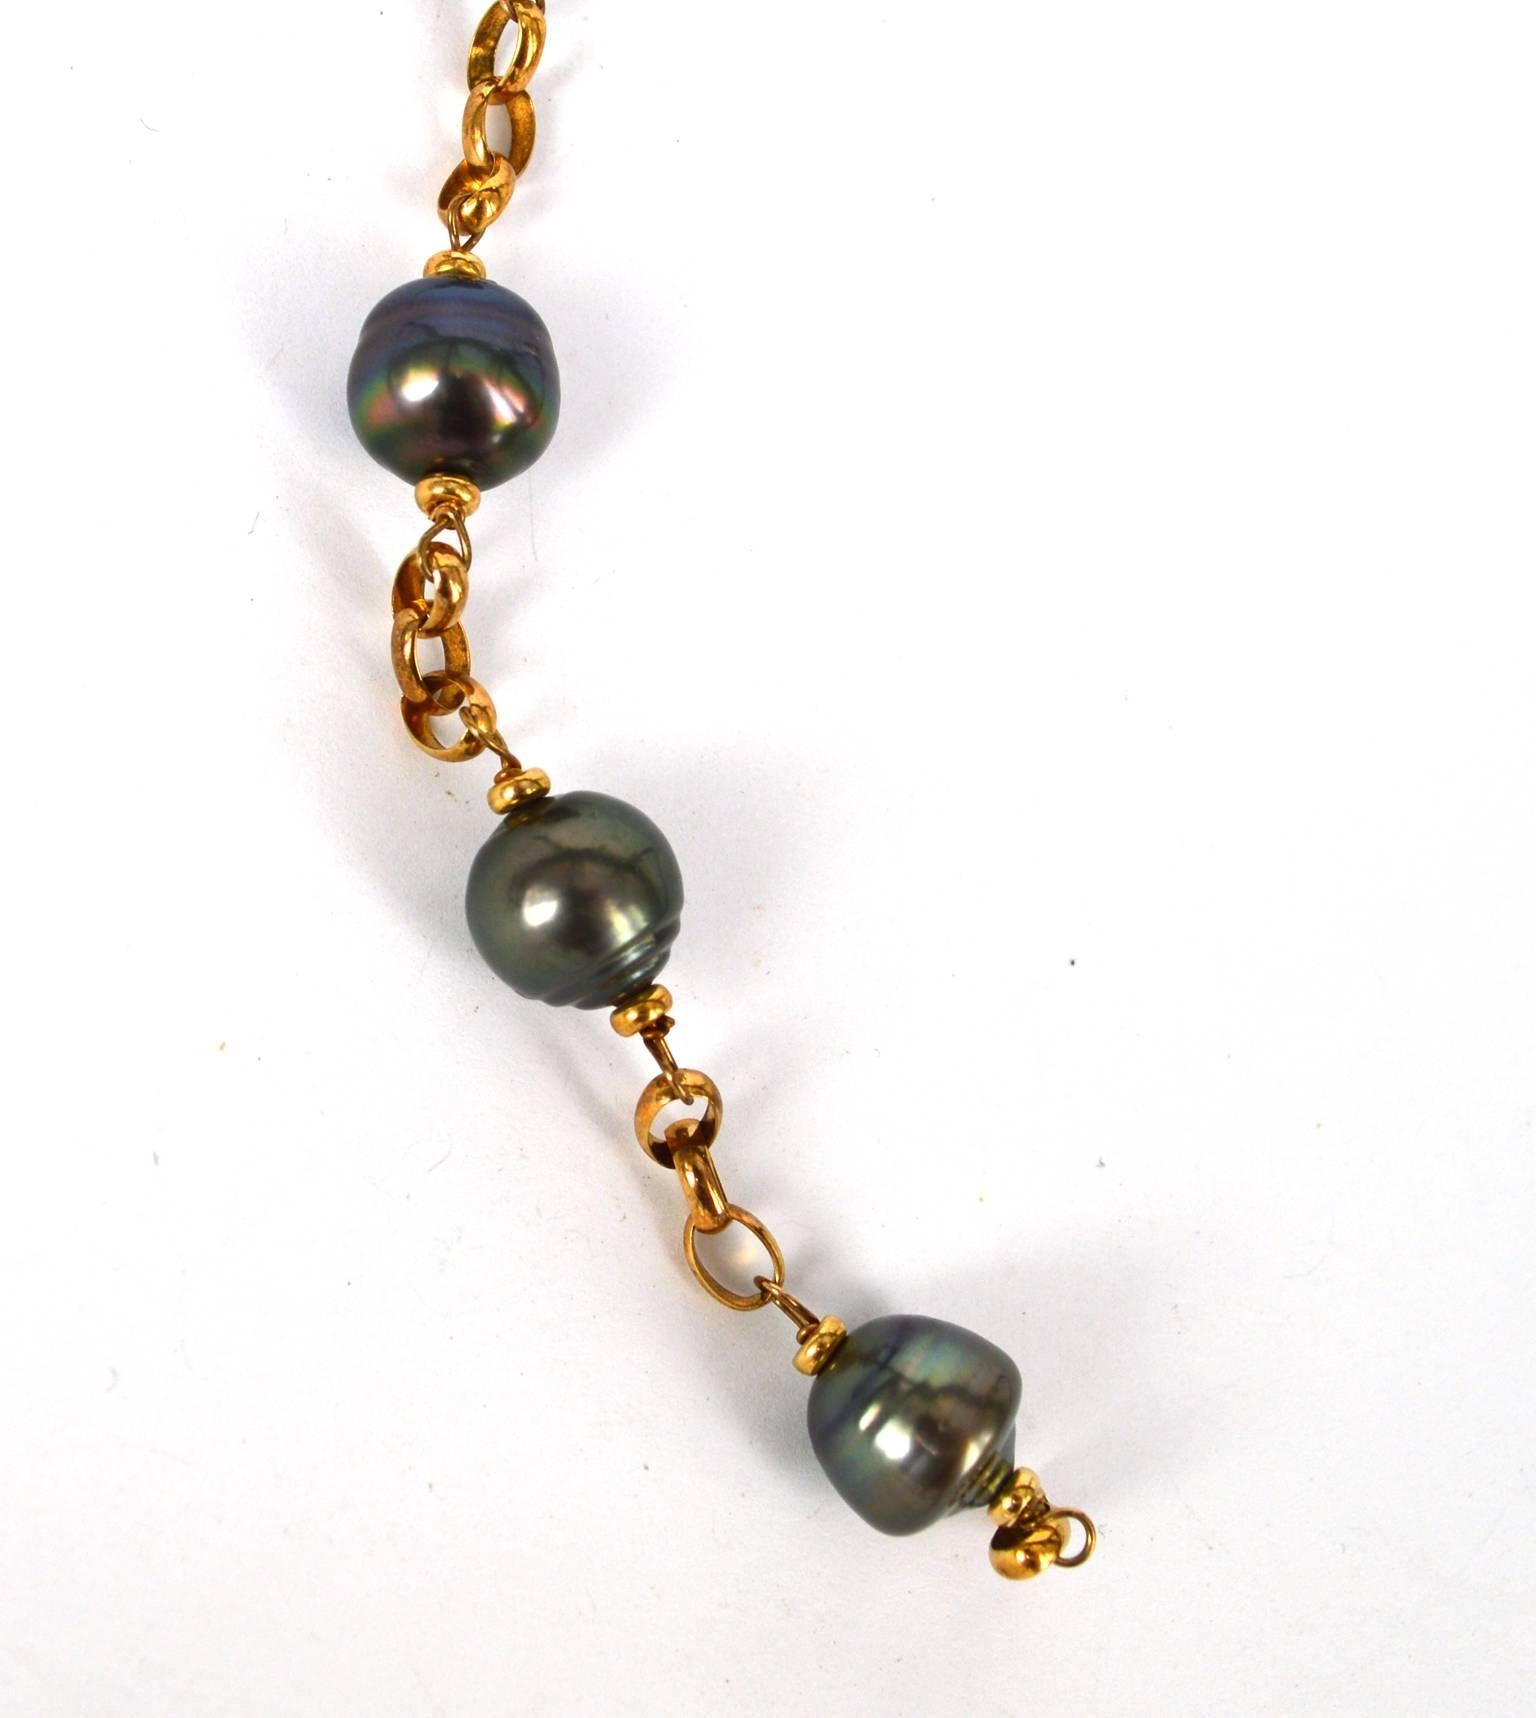 9 Carat gold chain and clasp with a feature of Tahitian pearls.
19cm in total length
Pearls are approximately 10mm in size.

All pearls are natural with natural inclusions.